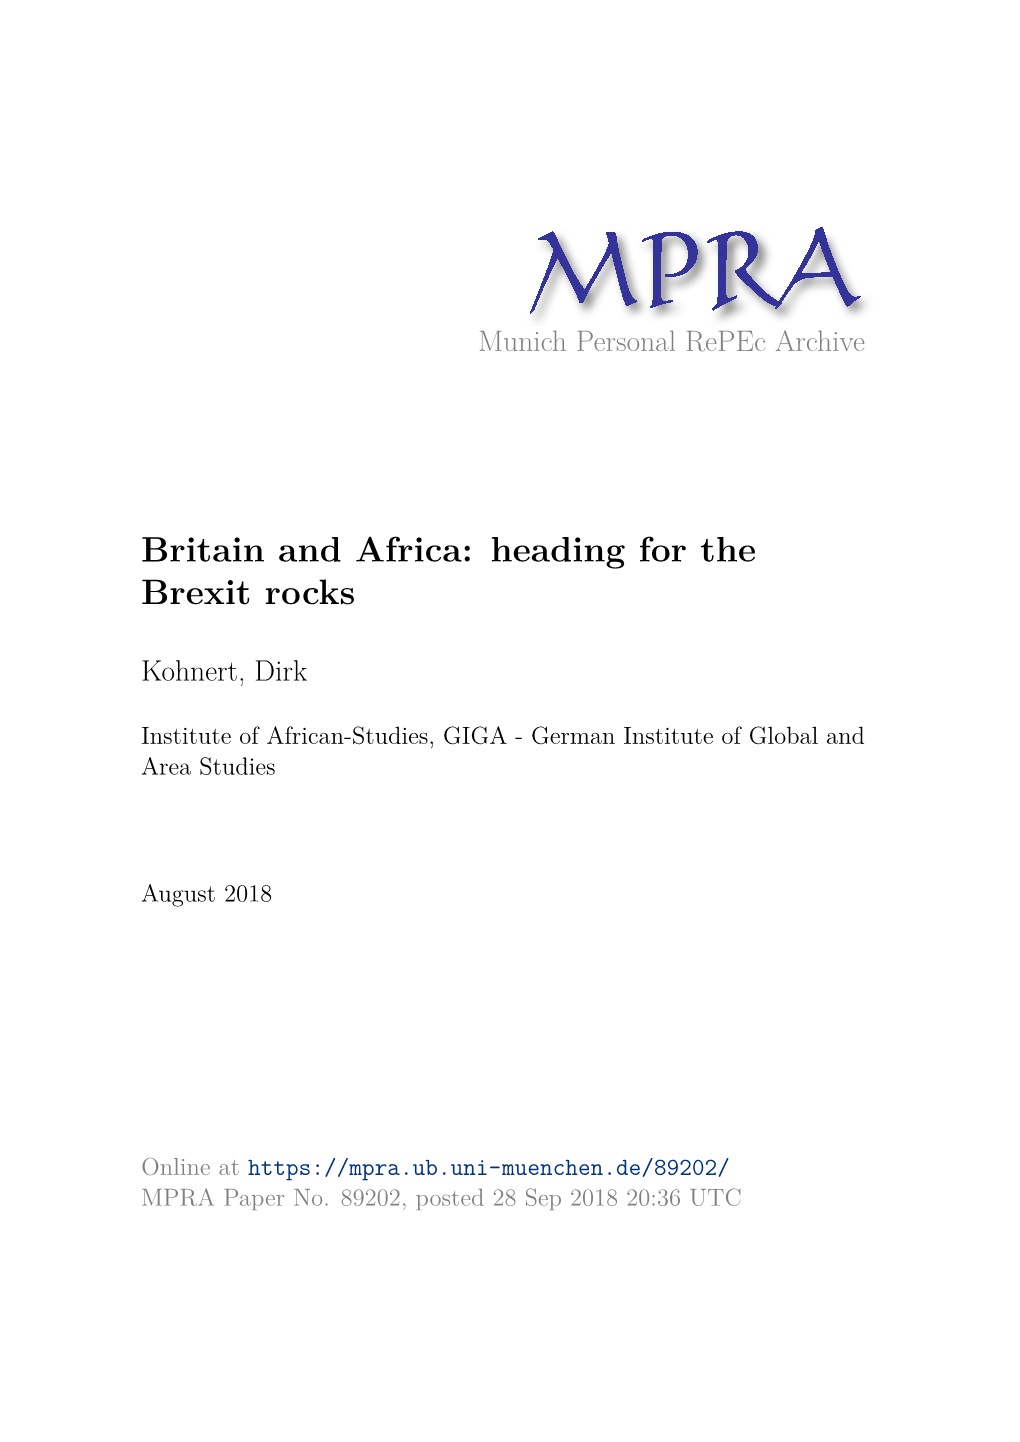 Britain and Africa: Heading for the Brexit Rocks